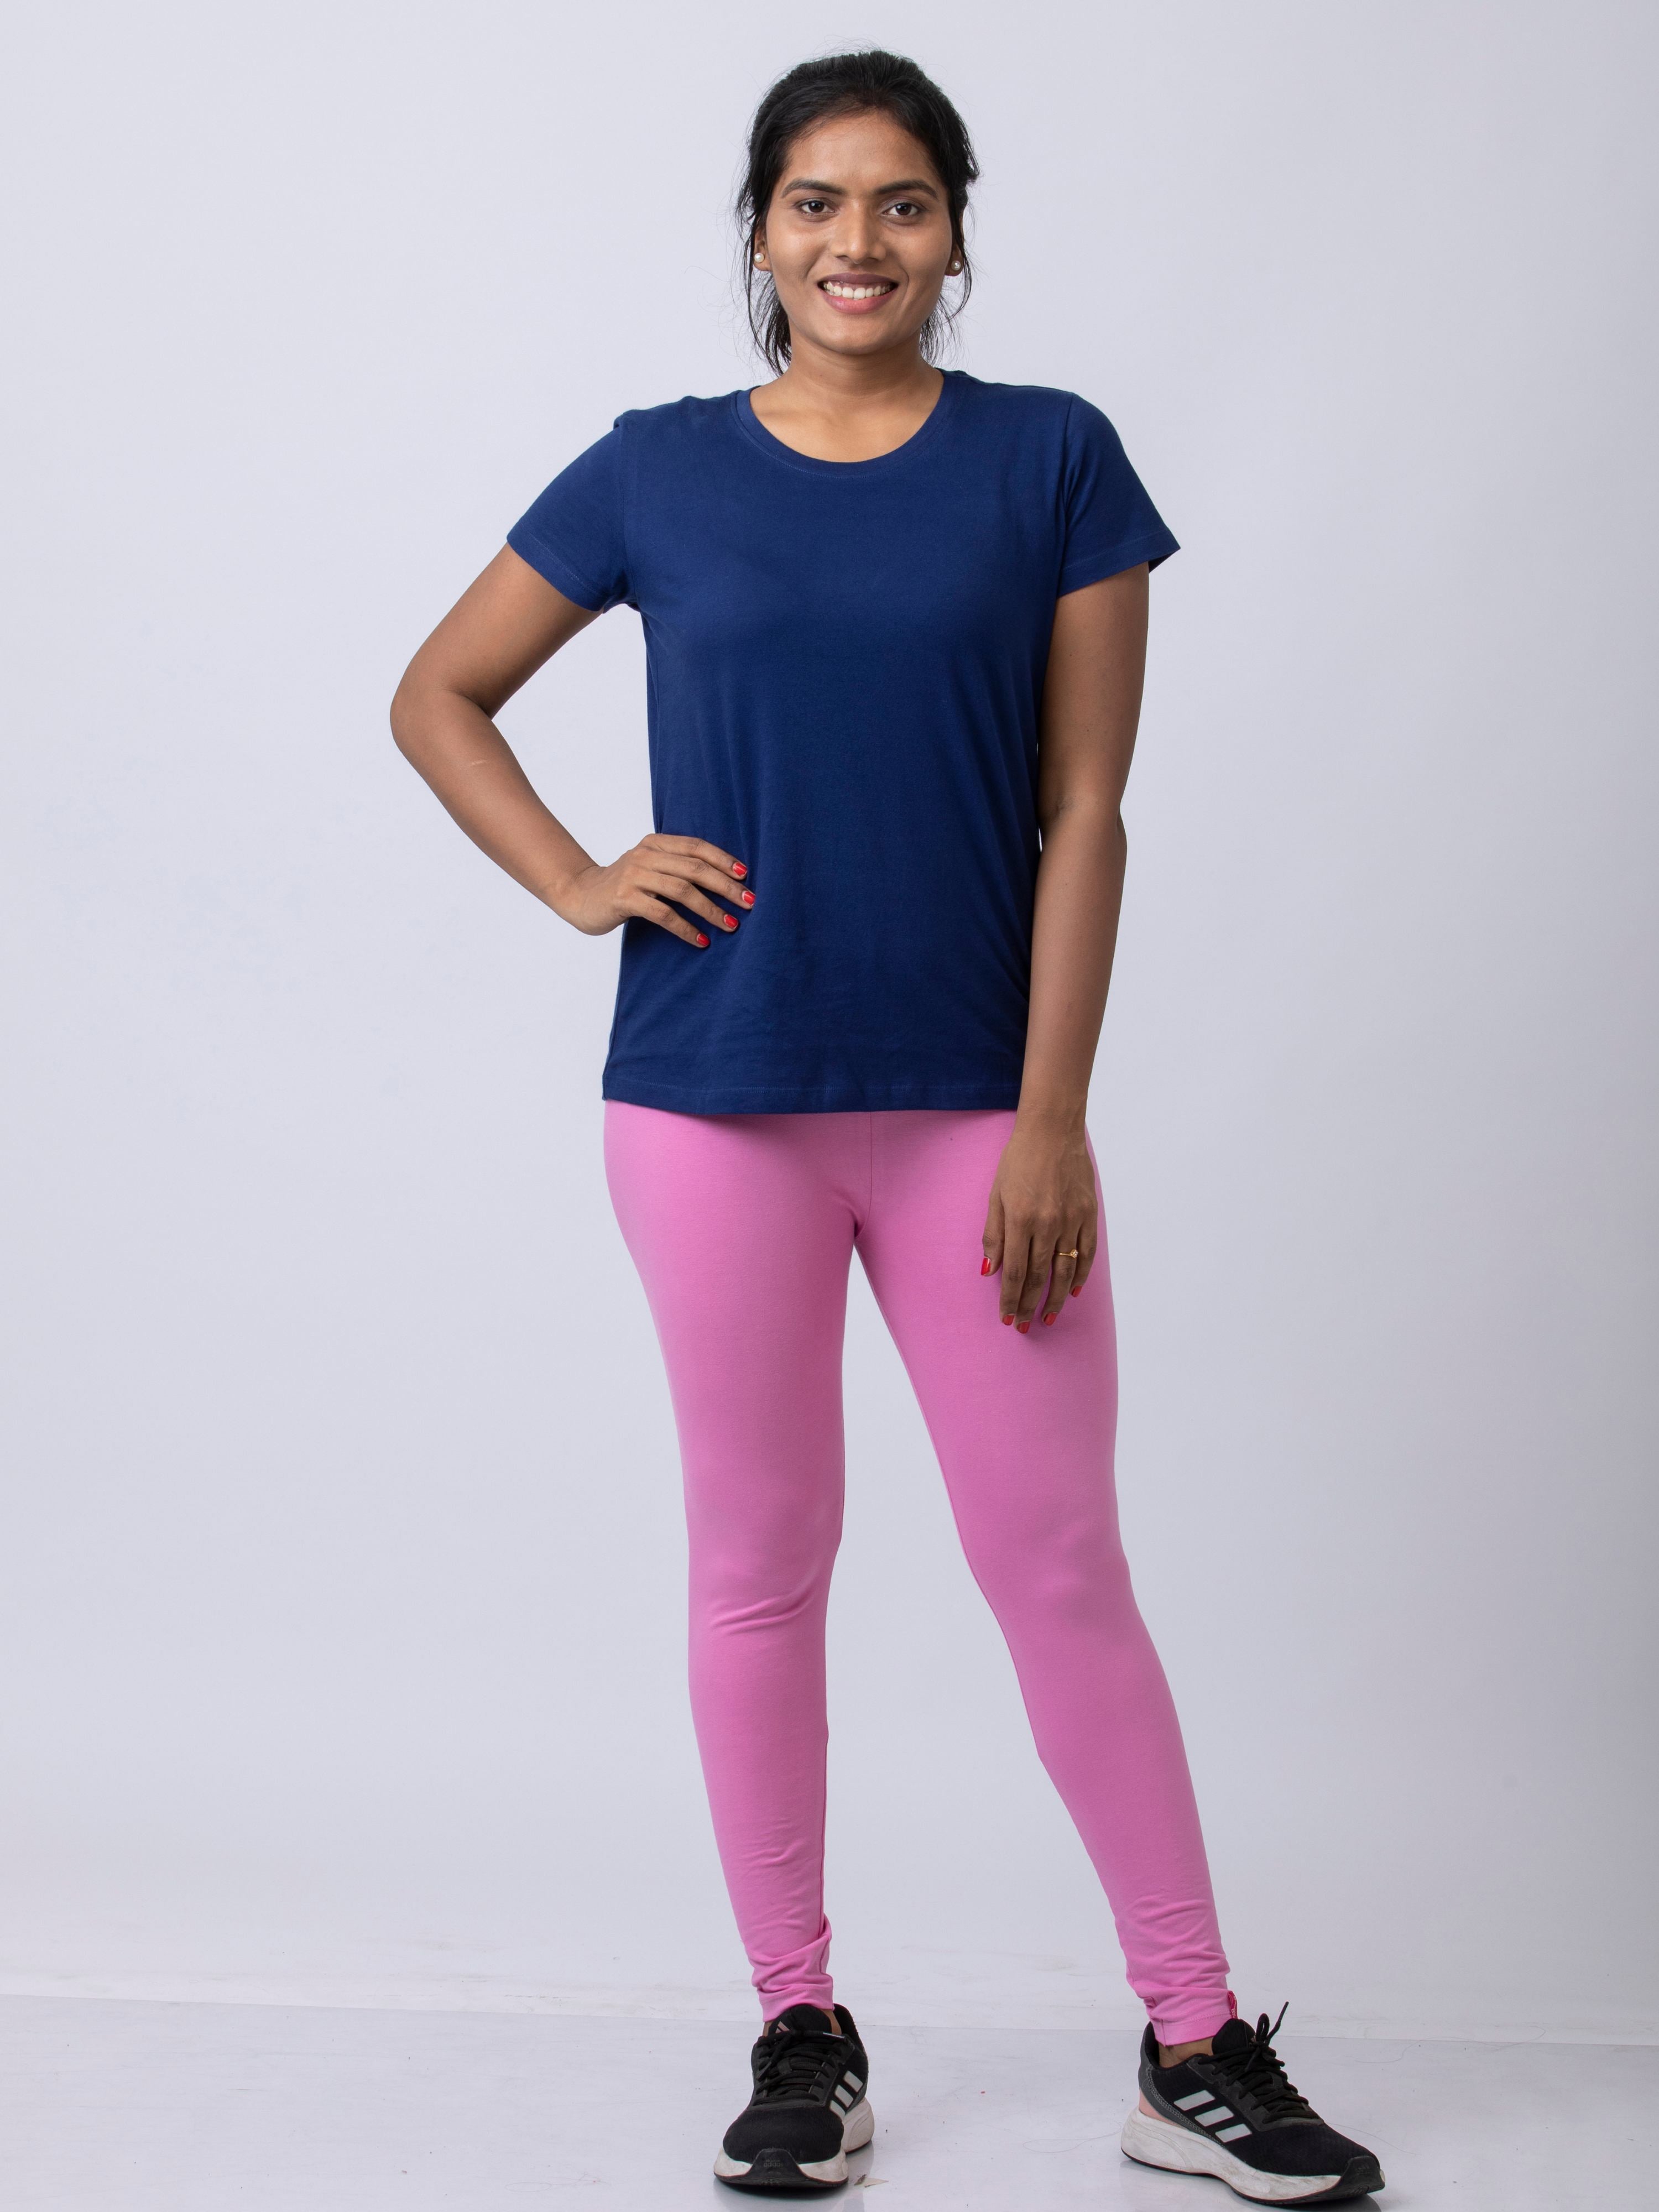 Jalie 2920 Leggings and Mini-Skirt Pattern - The Confident Stitch